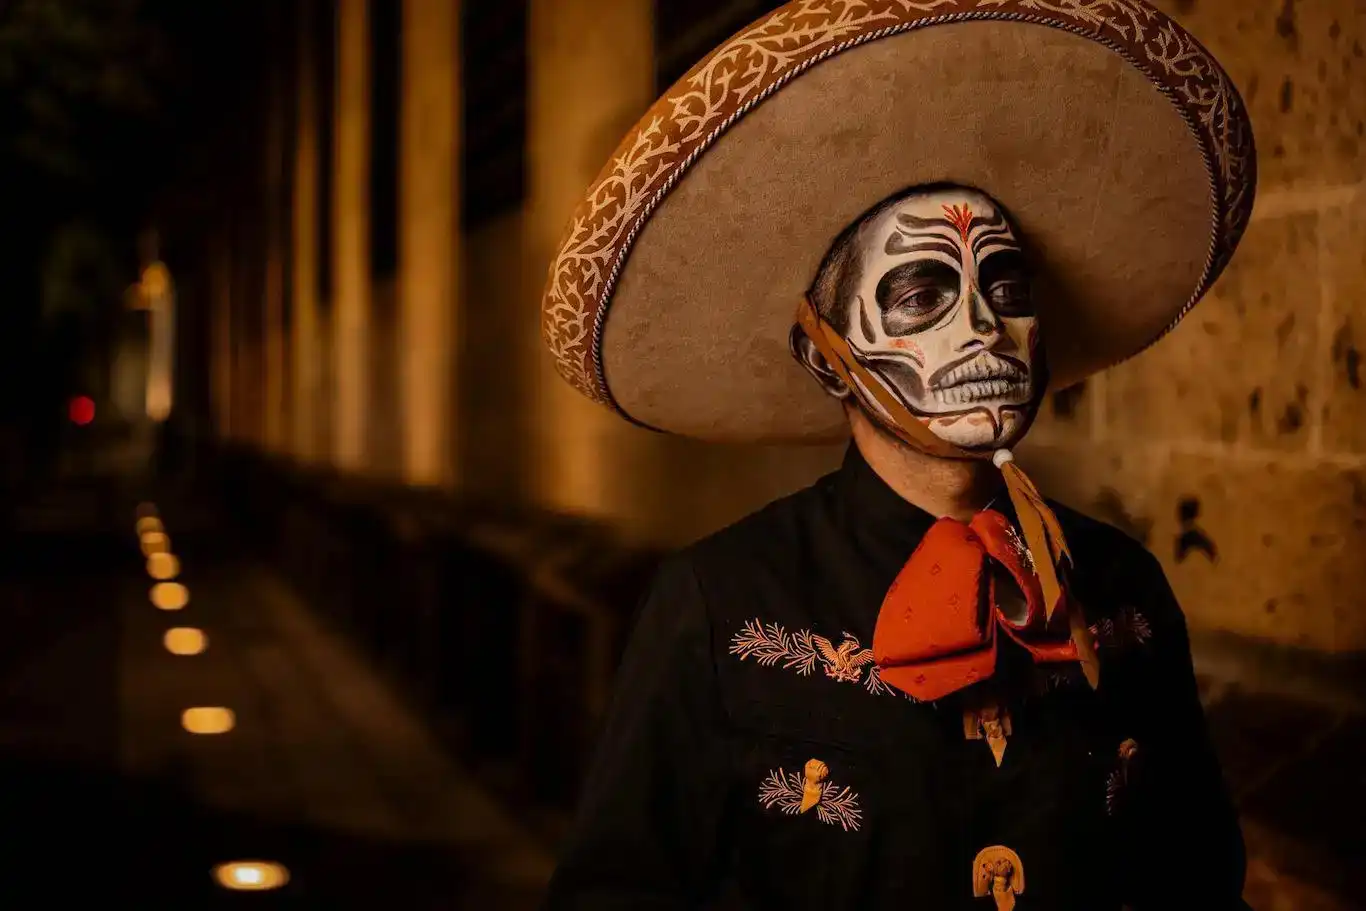 A man in Mexico City wearing a traditional Mexican attire.